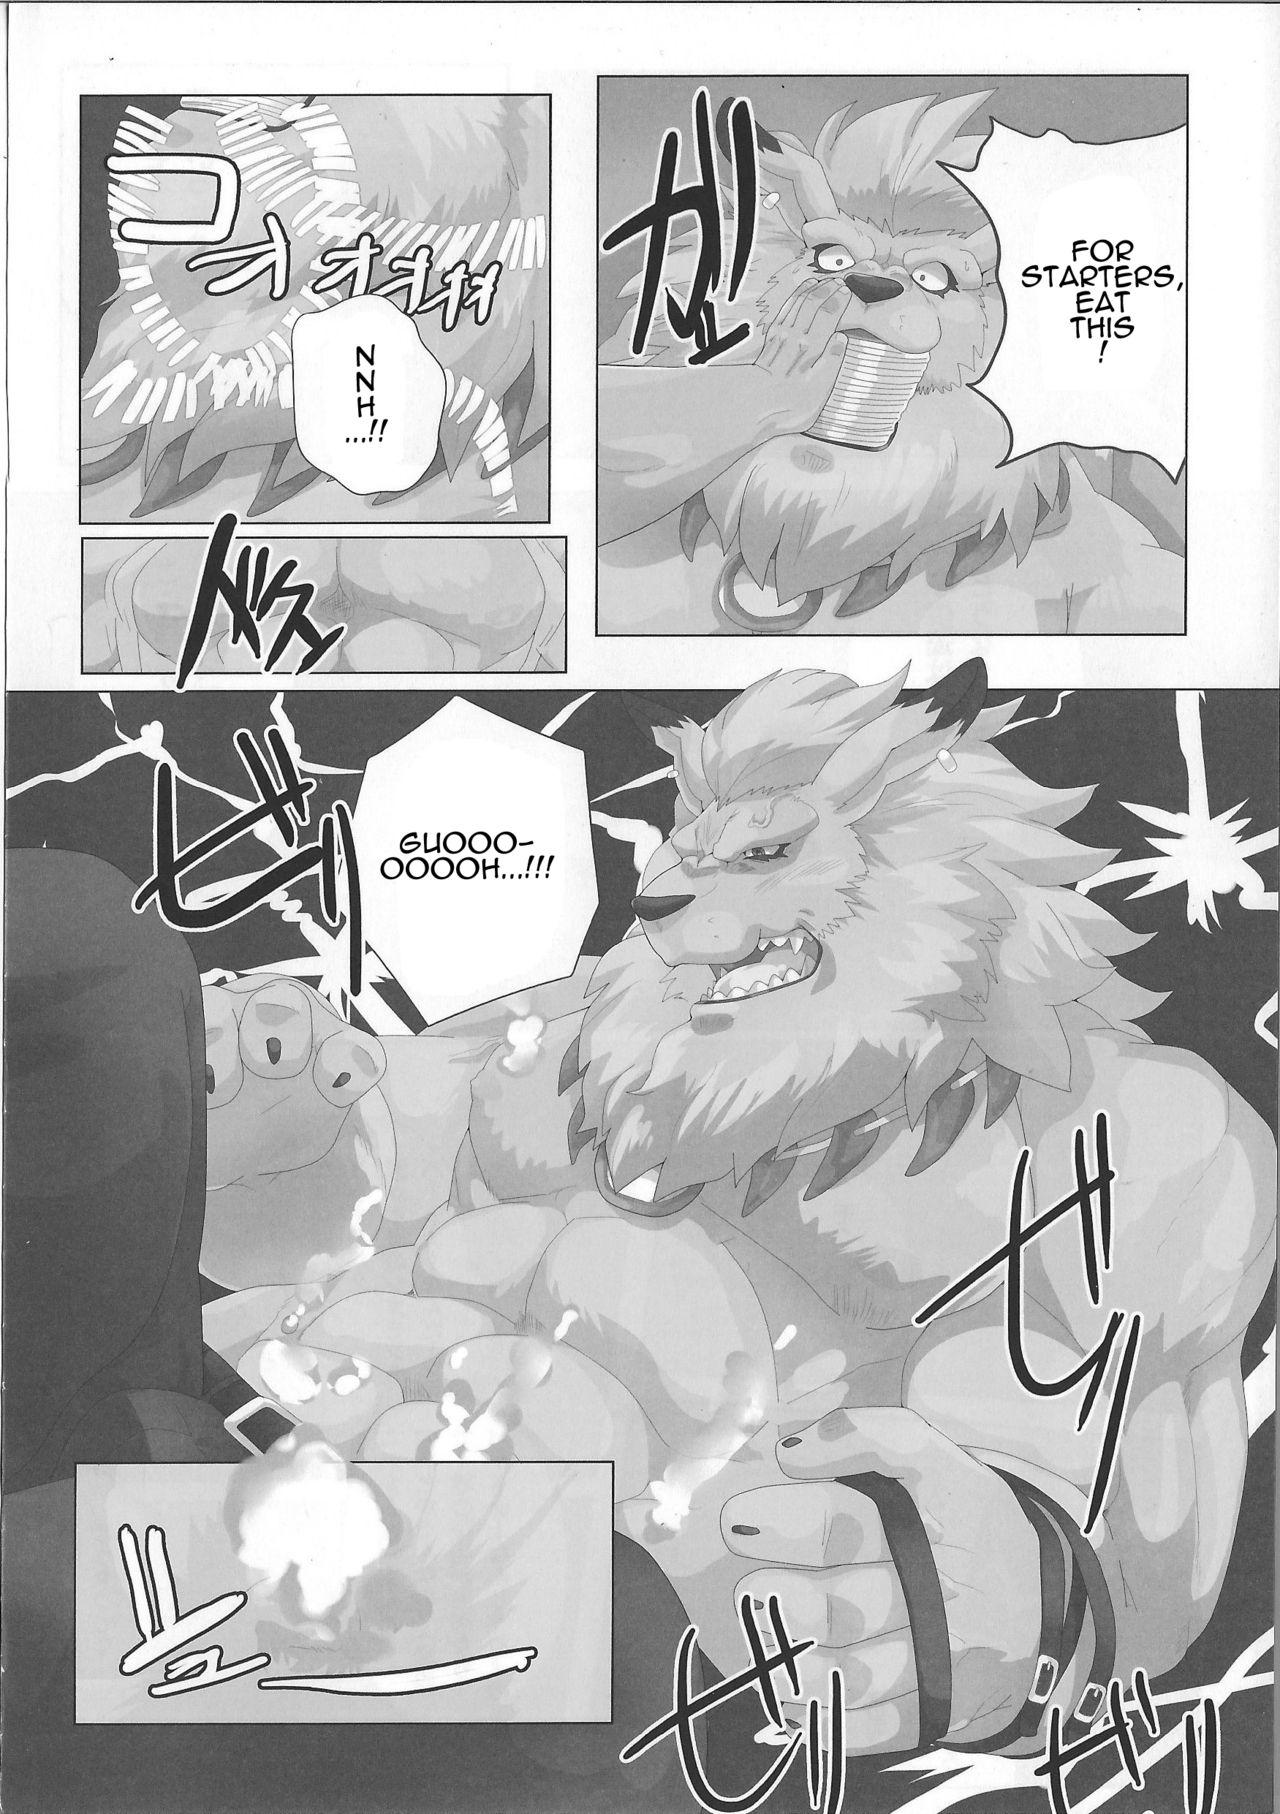 [Debirobu] For the Lion-Man Type Electric Life Form to Overturn Fate - Leomon Doujin [ENG] 7